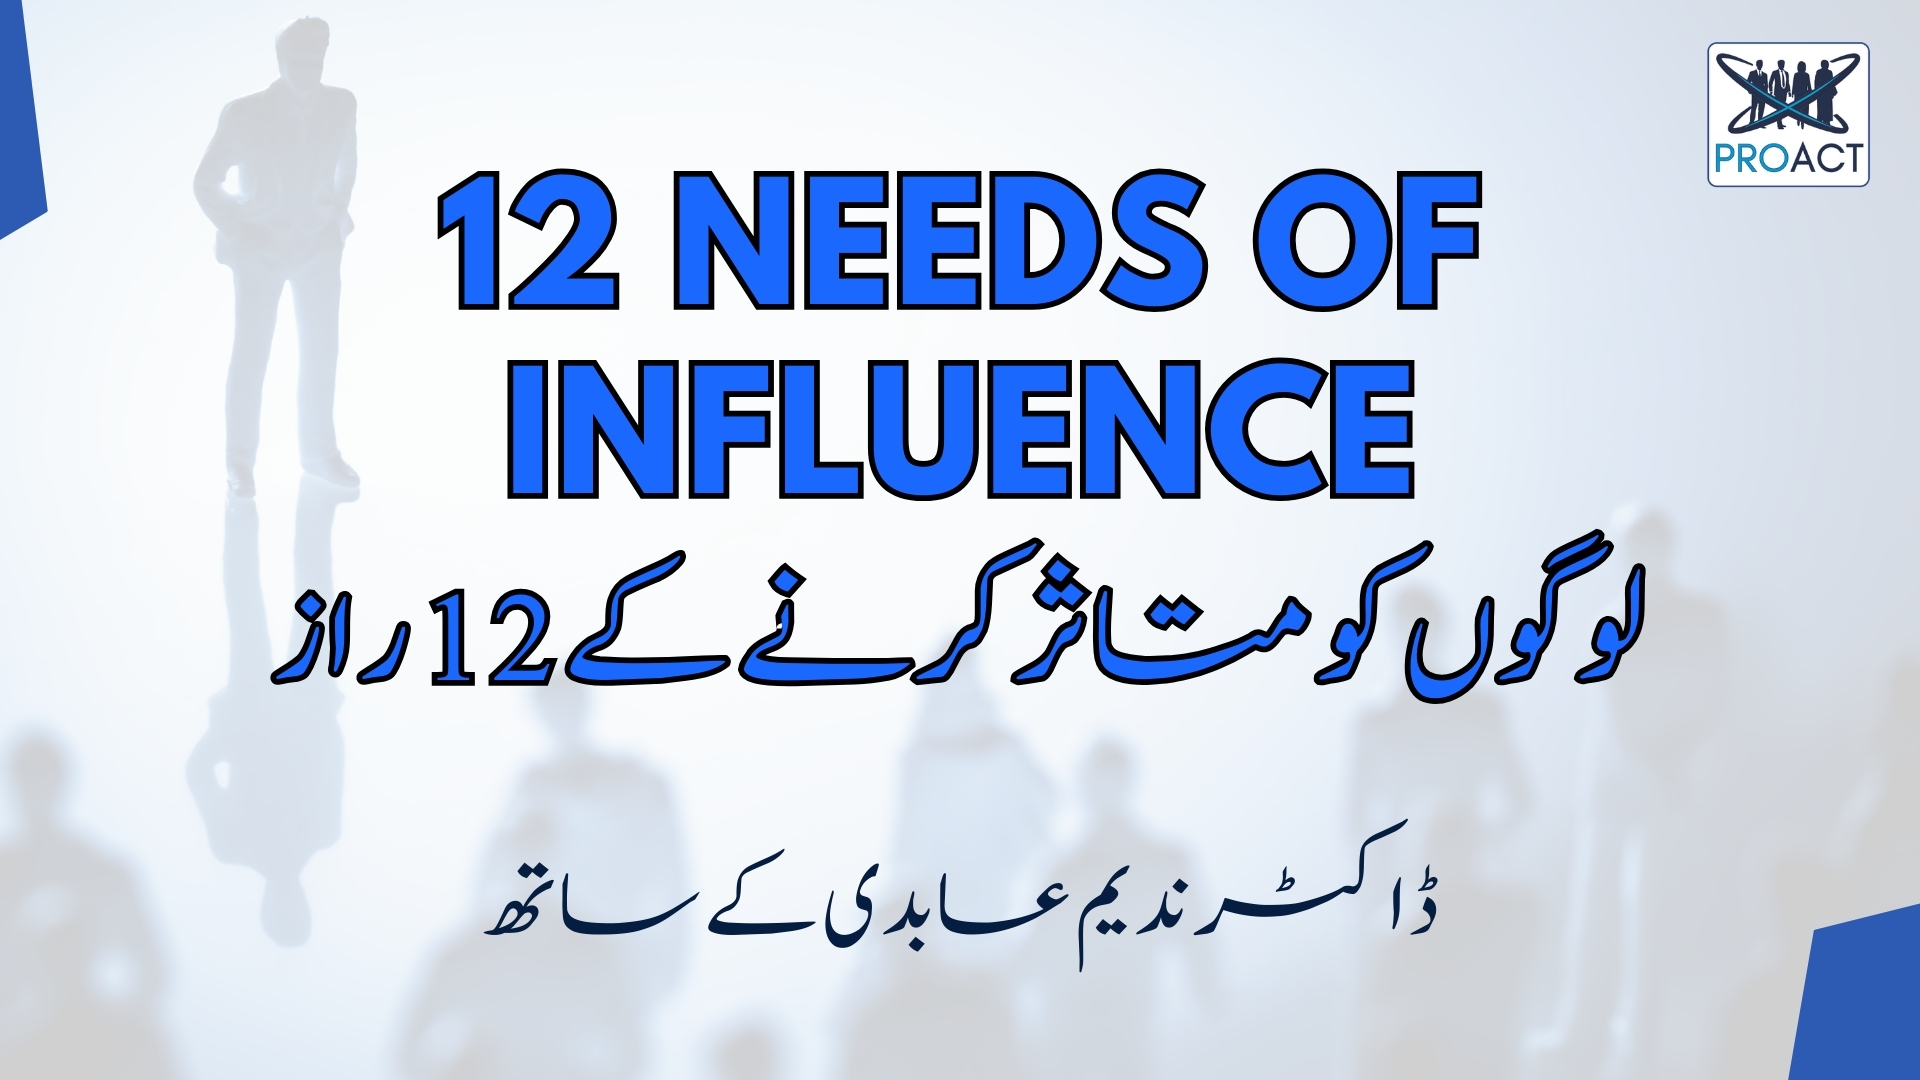 12 NEEDS OF INFLUENCE by Dr. NADEEM ABIDI